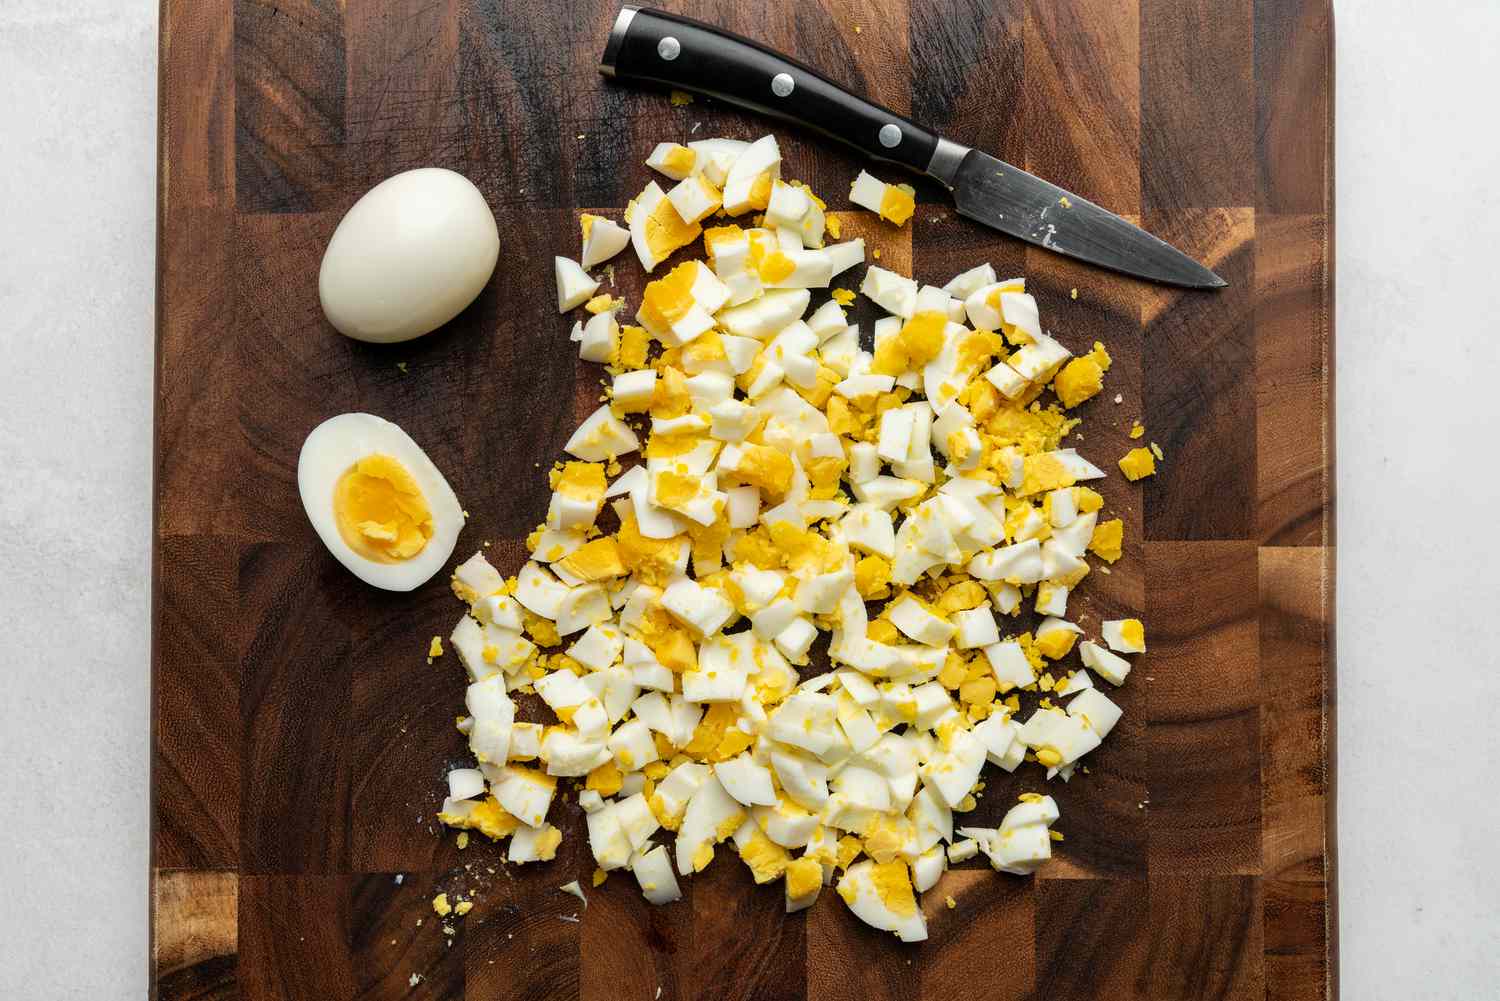 Coarsely chop the eggs on a cutting board 